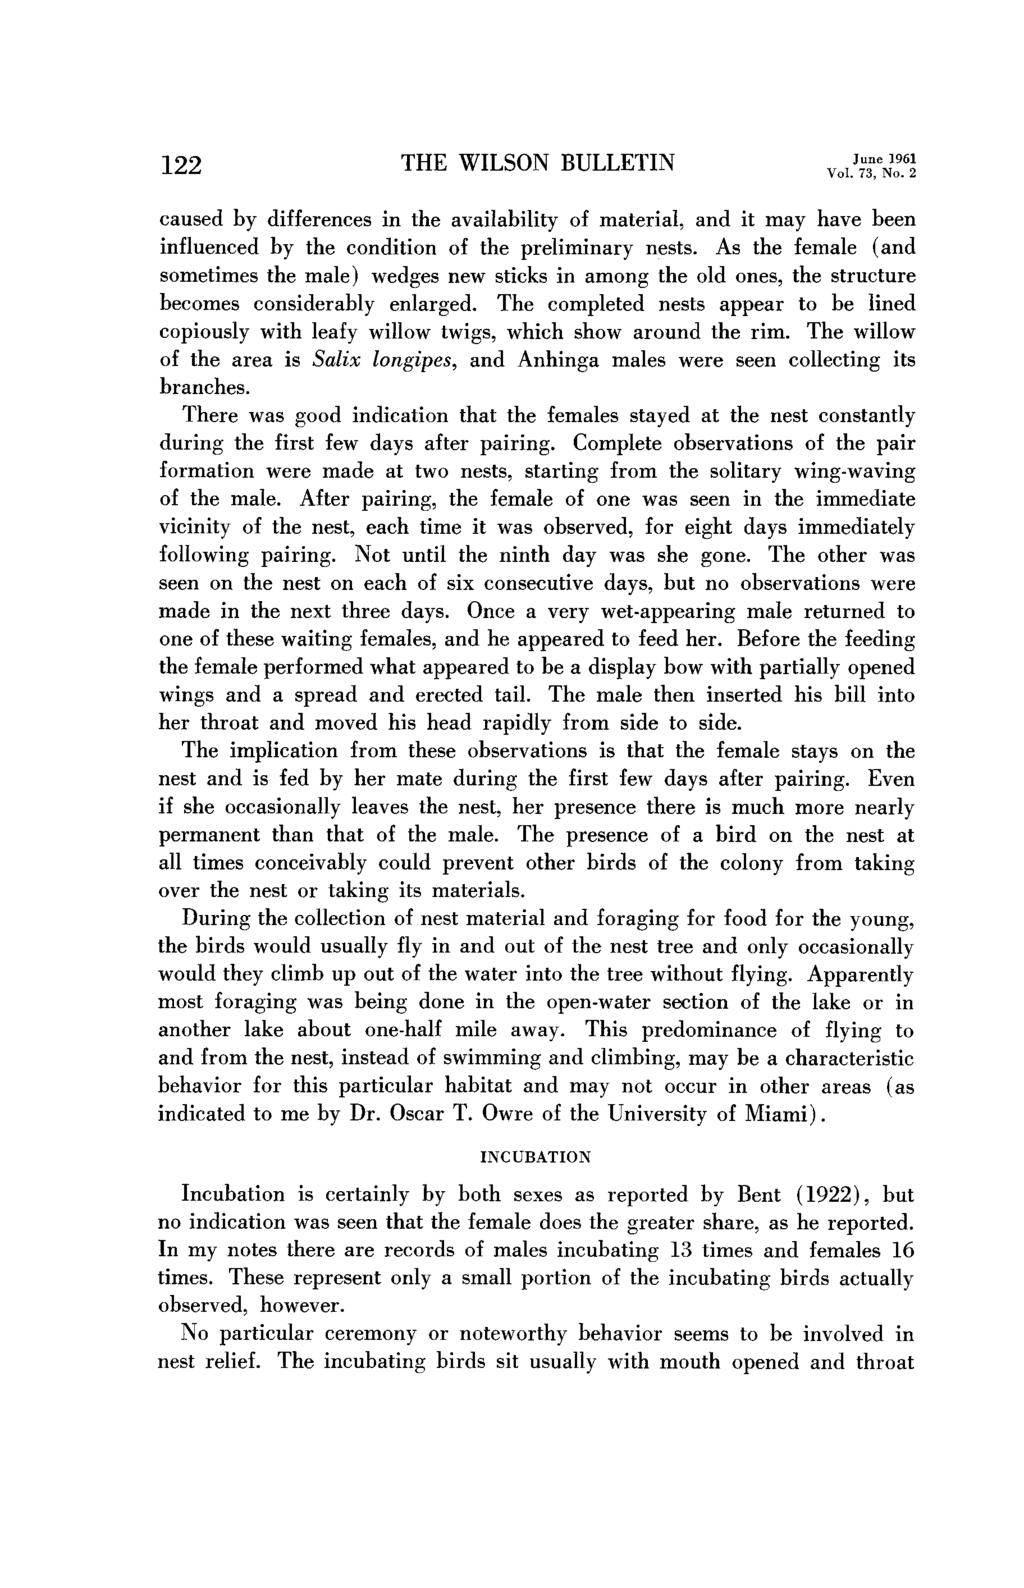 122 THE WILSON BULLETIN June 1961 Vol. 73, No. 2 caused by differences in the availability of material, and it may have been influenced by the condition of the preliminary nests.